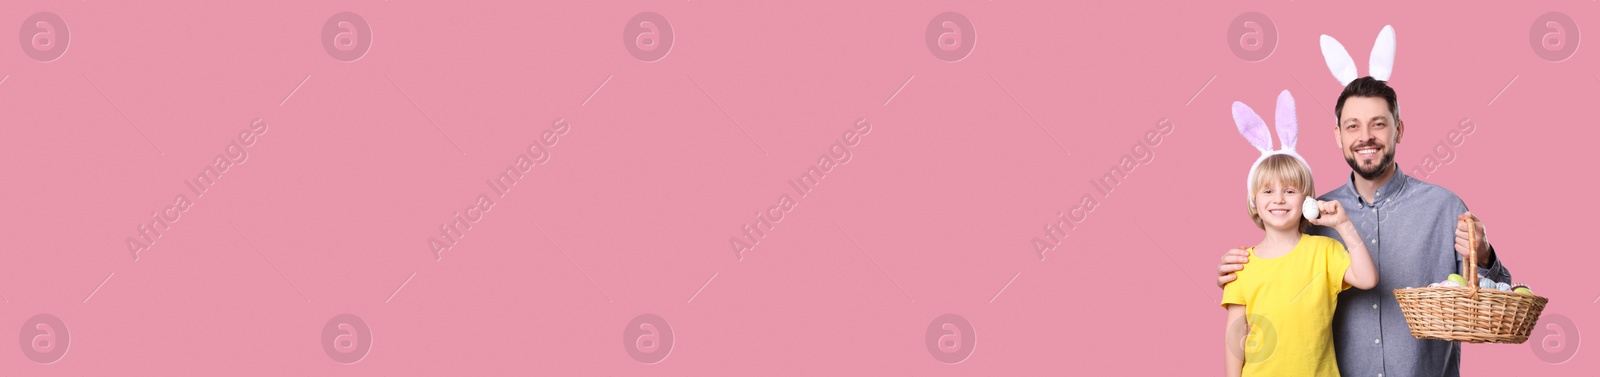 Image of Happy father and his son with bunny ears holding basket full of Easter eggs on pink background, space for text. Banner design